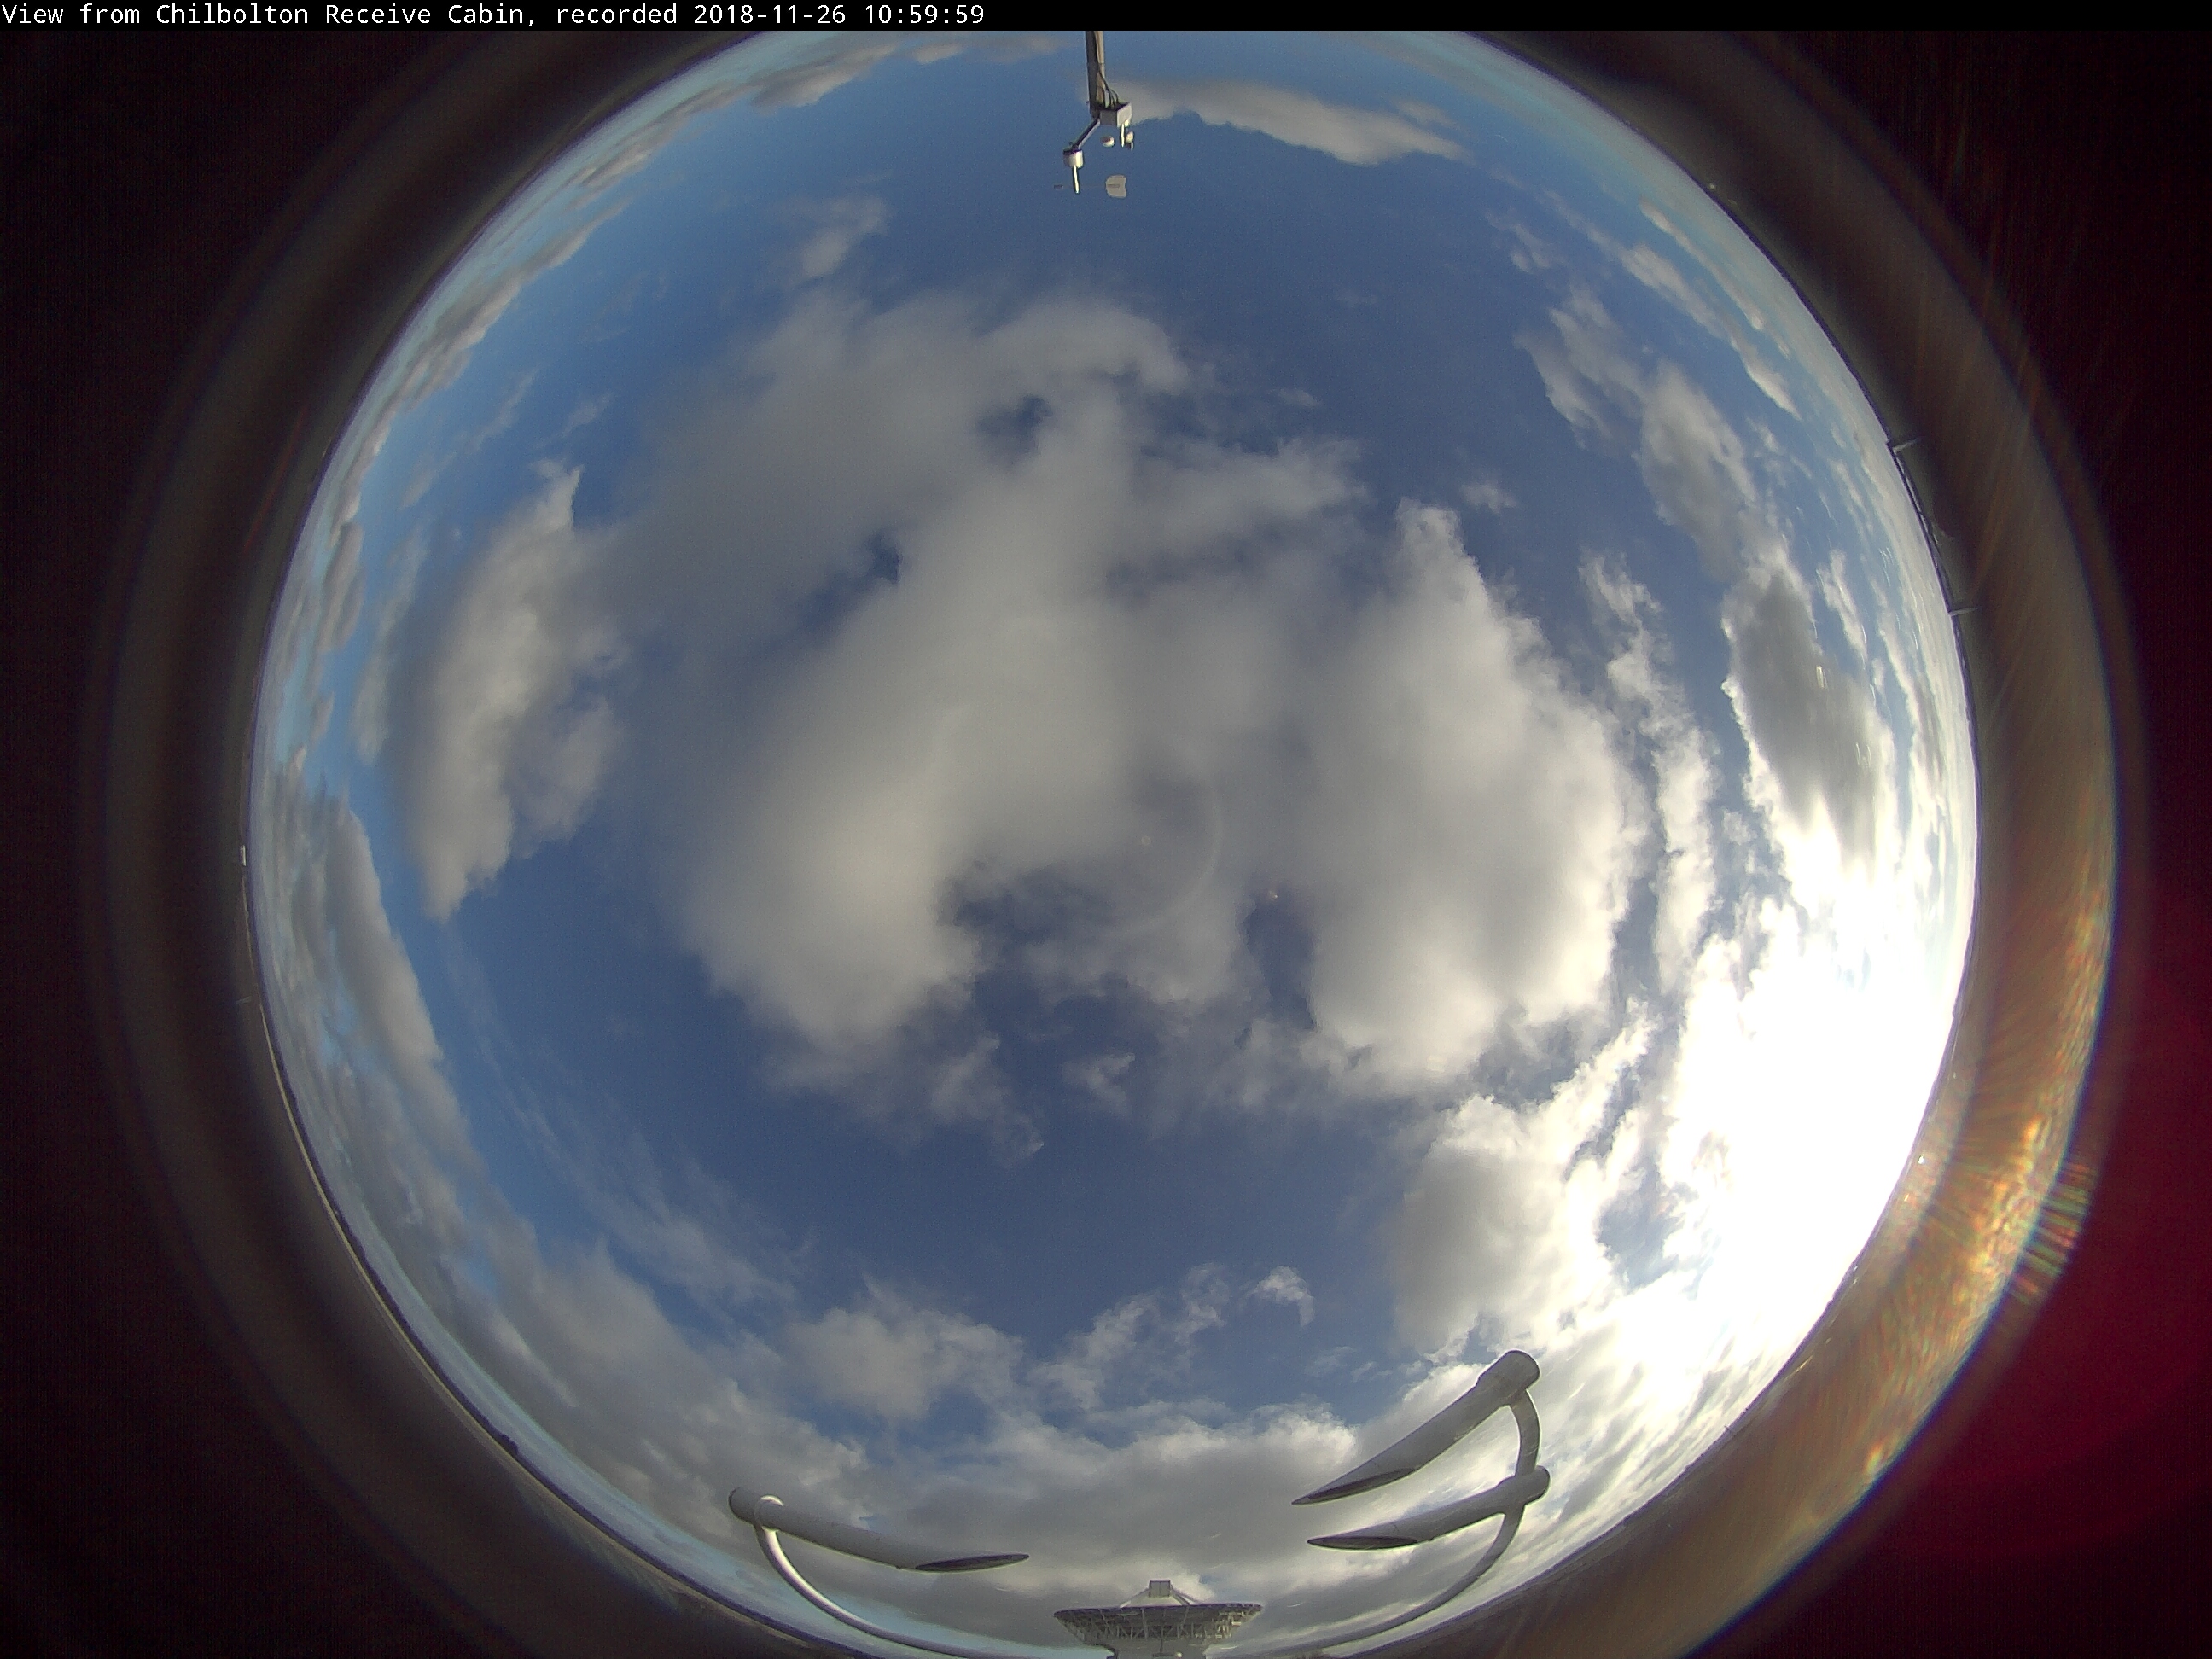 Whole-sky view of clouds on a sunny day from Chilbolton Observatory